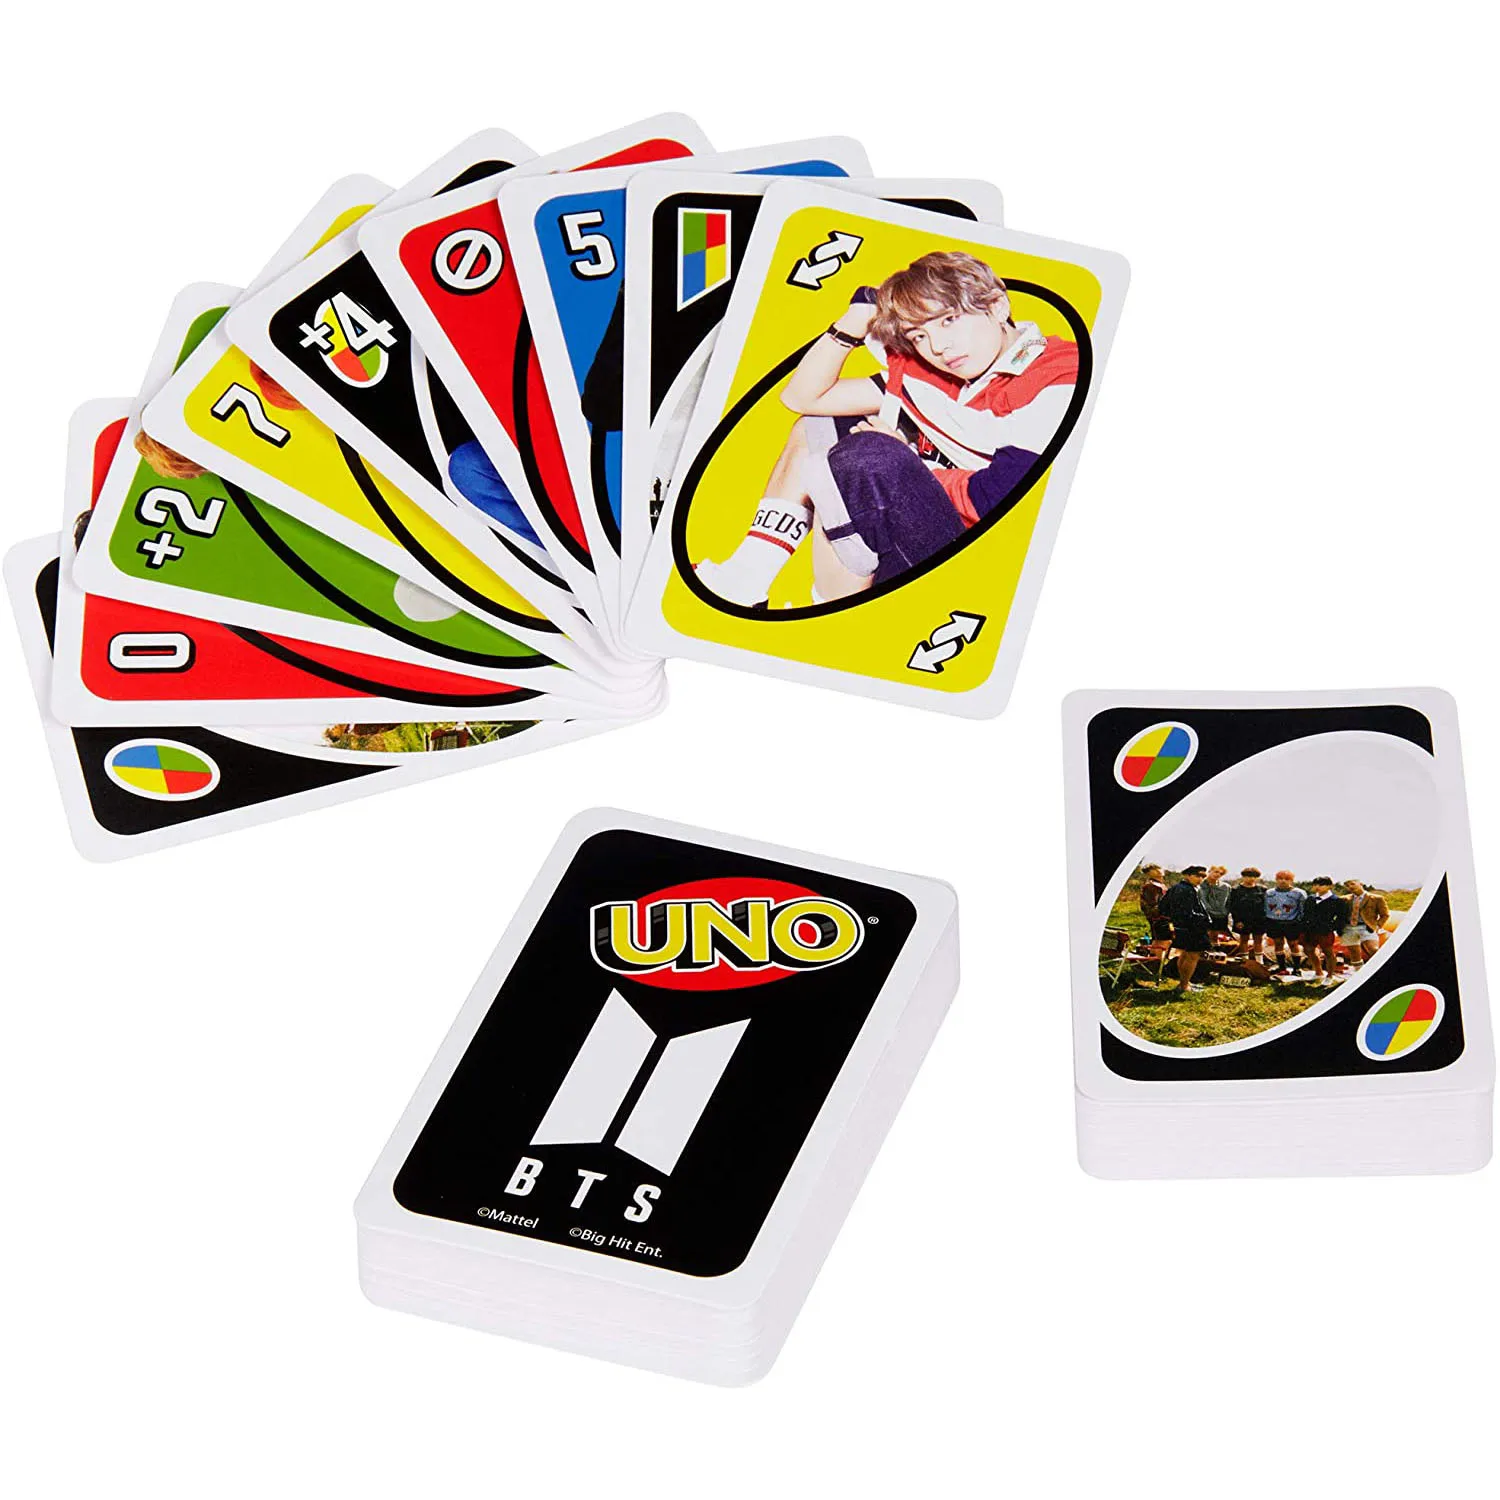 BTS UNO Cards (Gift Box)